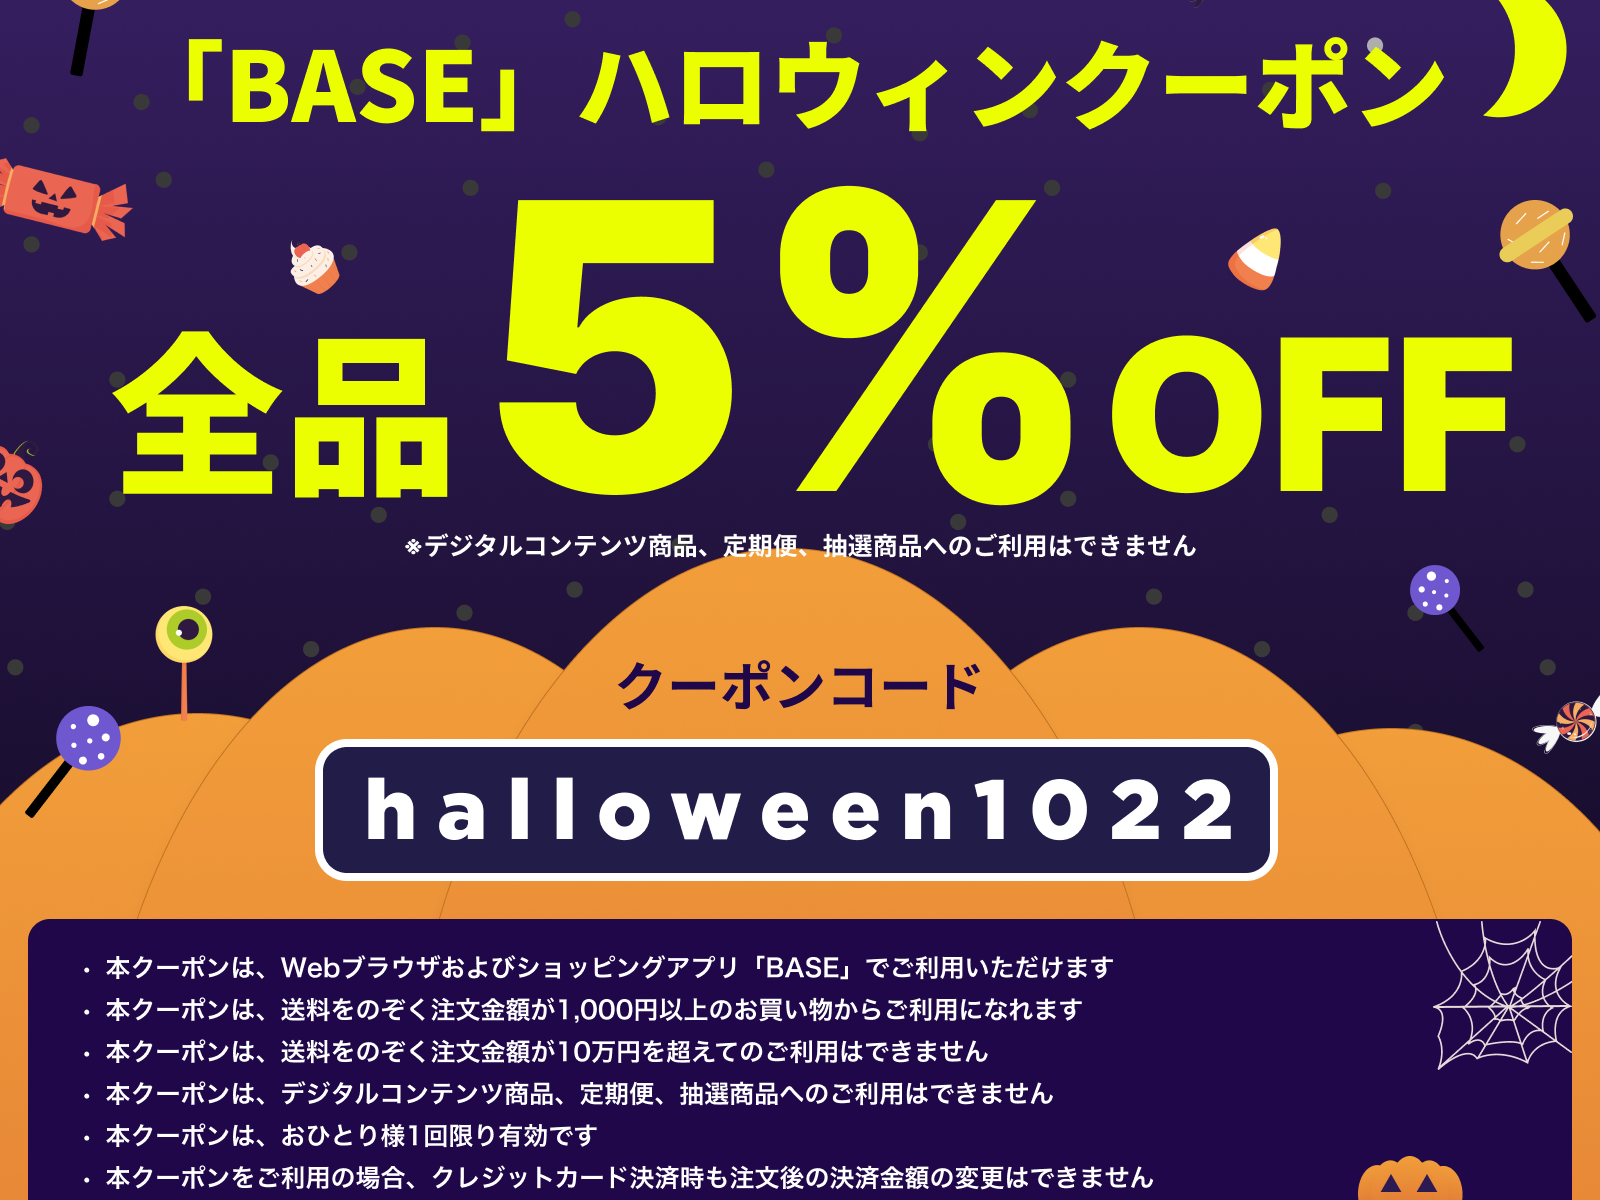 You are currently viewing 10月22日（金）〜24日（日）の期間中、お客様にご利用いただける5%OFFクーポンを配布いたします。